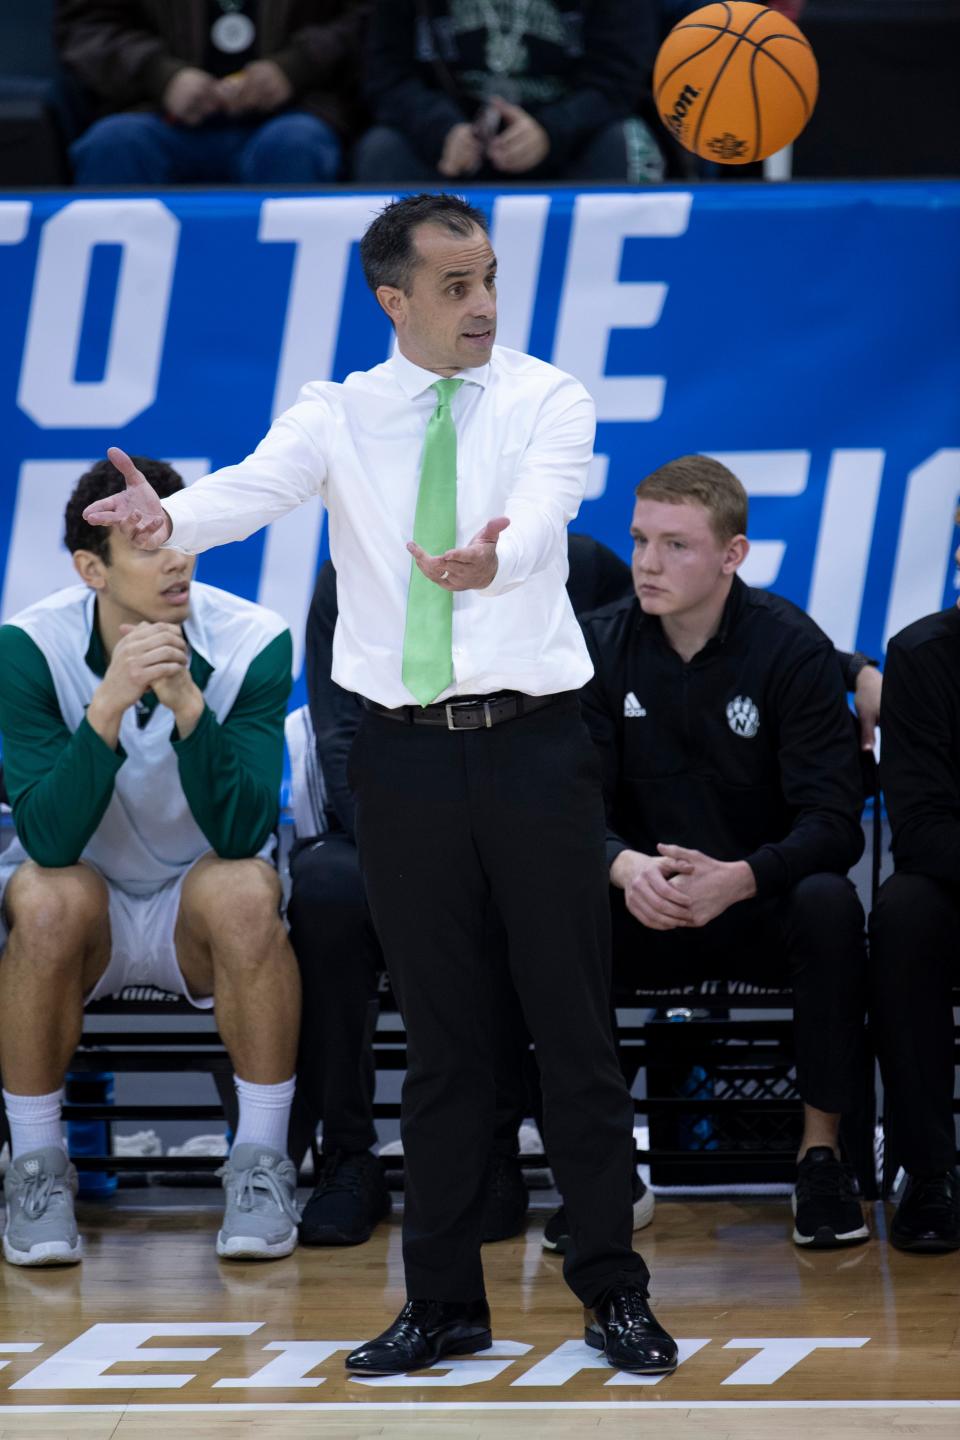 Northwest Missouri's Head Coach Ben McCollum questions a referee during their semifinal game of the 2022 NCAA DII Men's Basketball Championship.